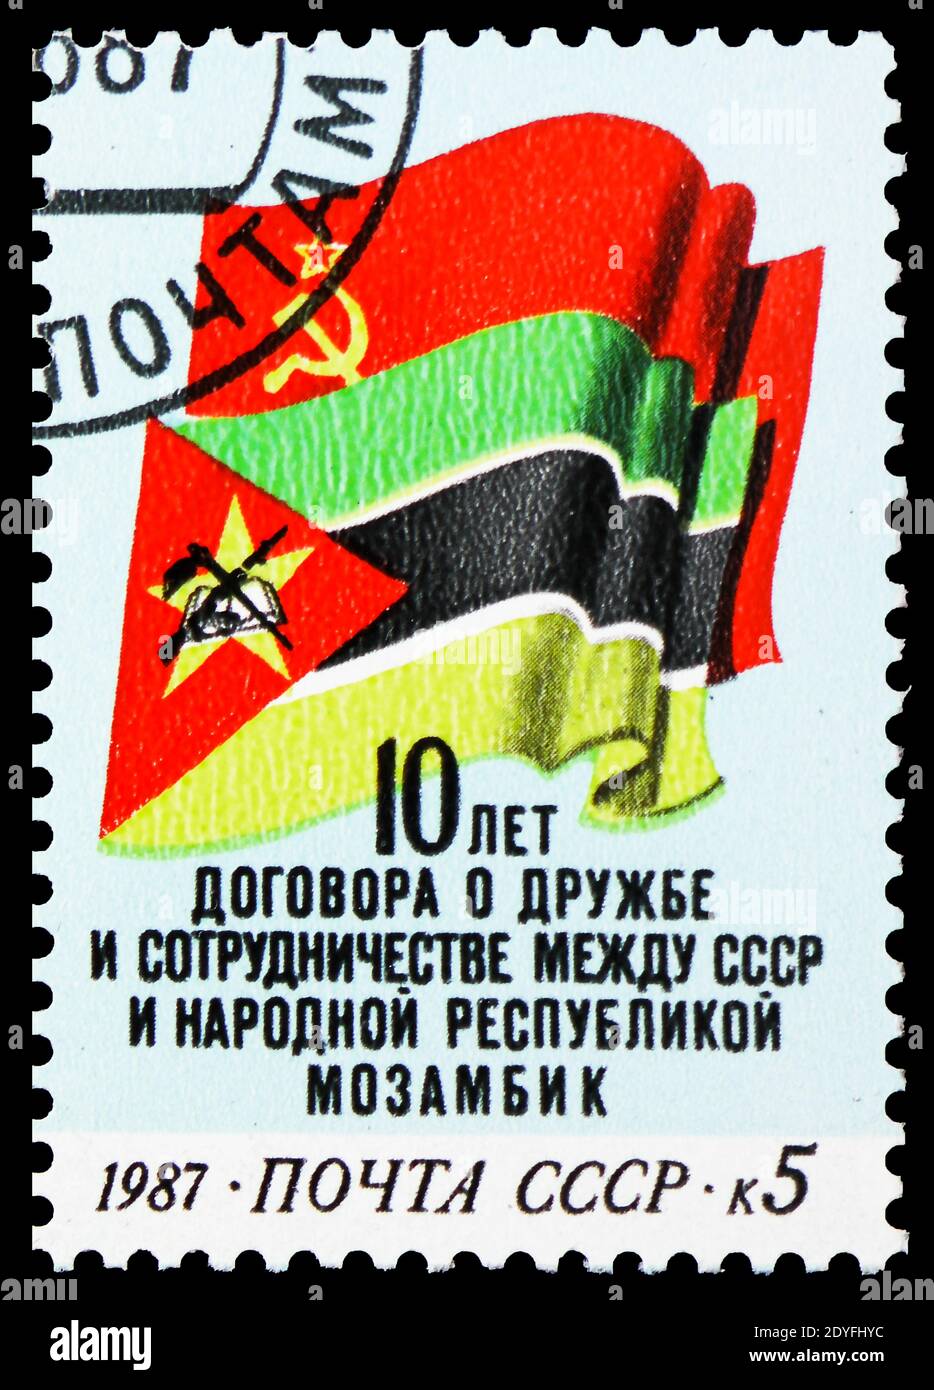 MOSCOW, RUSSIA - MAY 25, 2019: Postage stamp printed in Soviet Union shows Flags, Republic Mozambique serie, circa 1987 Stock Photo